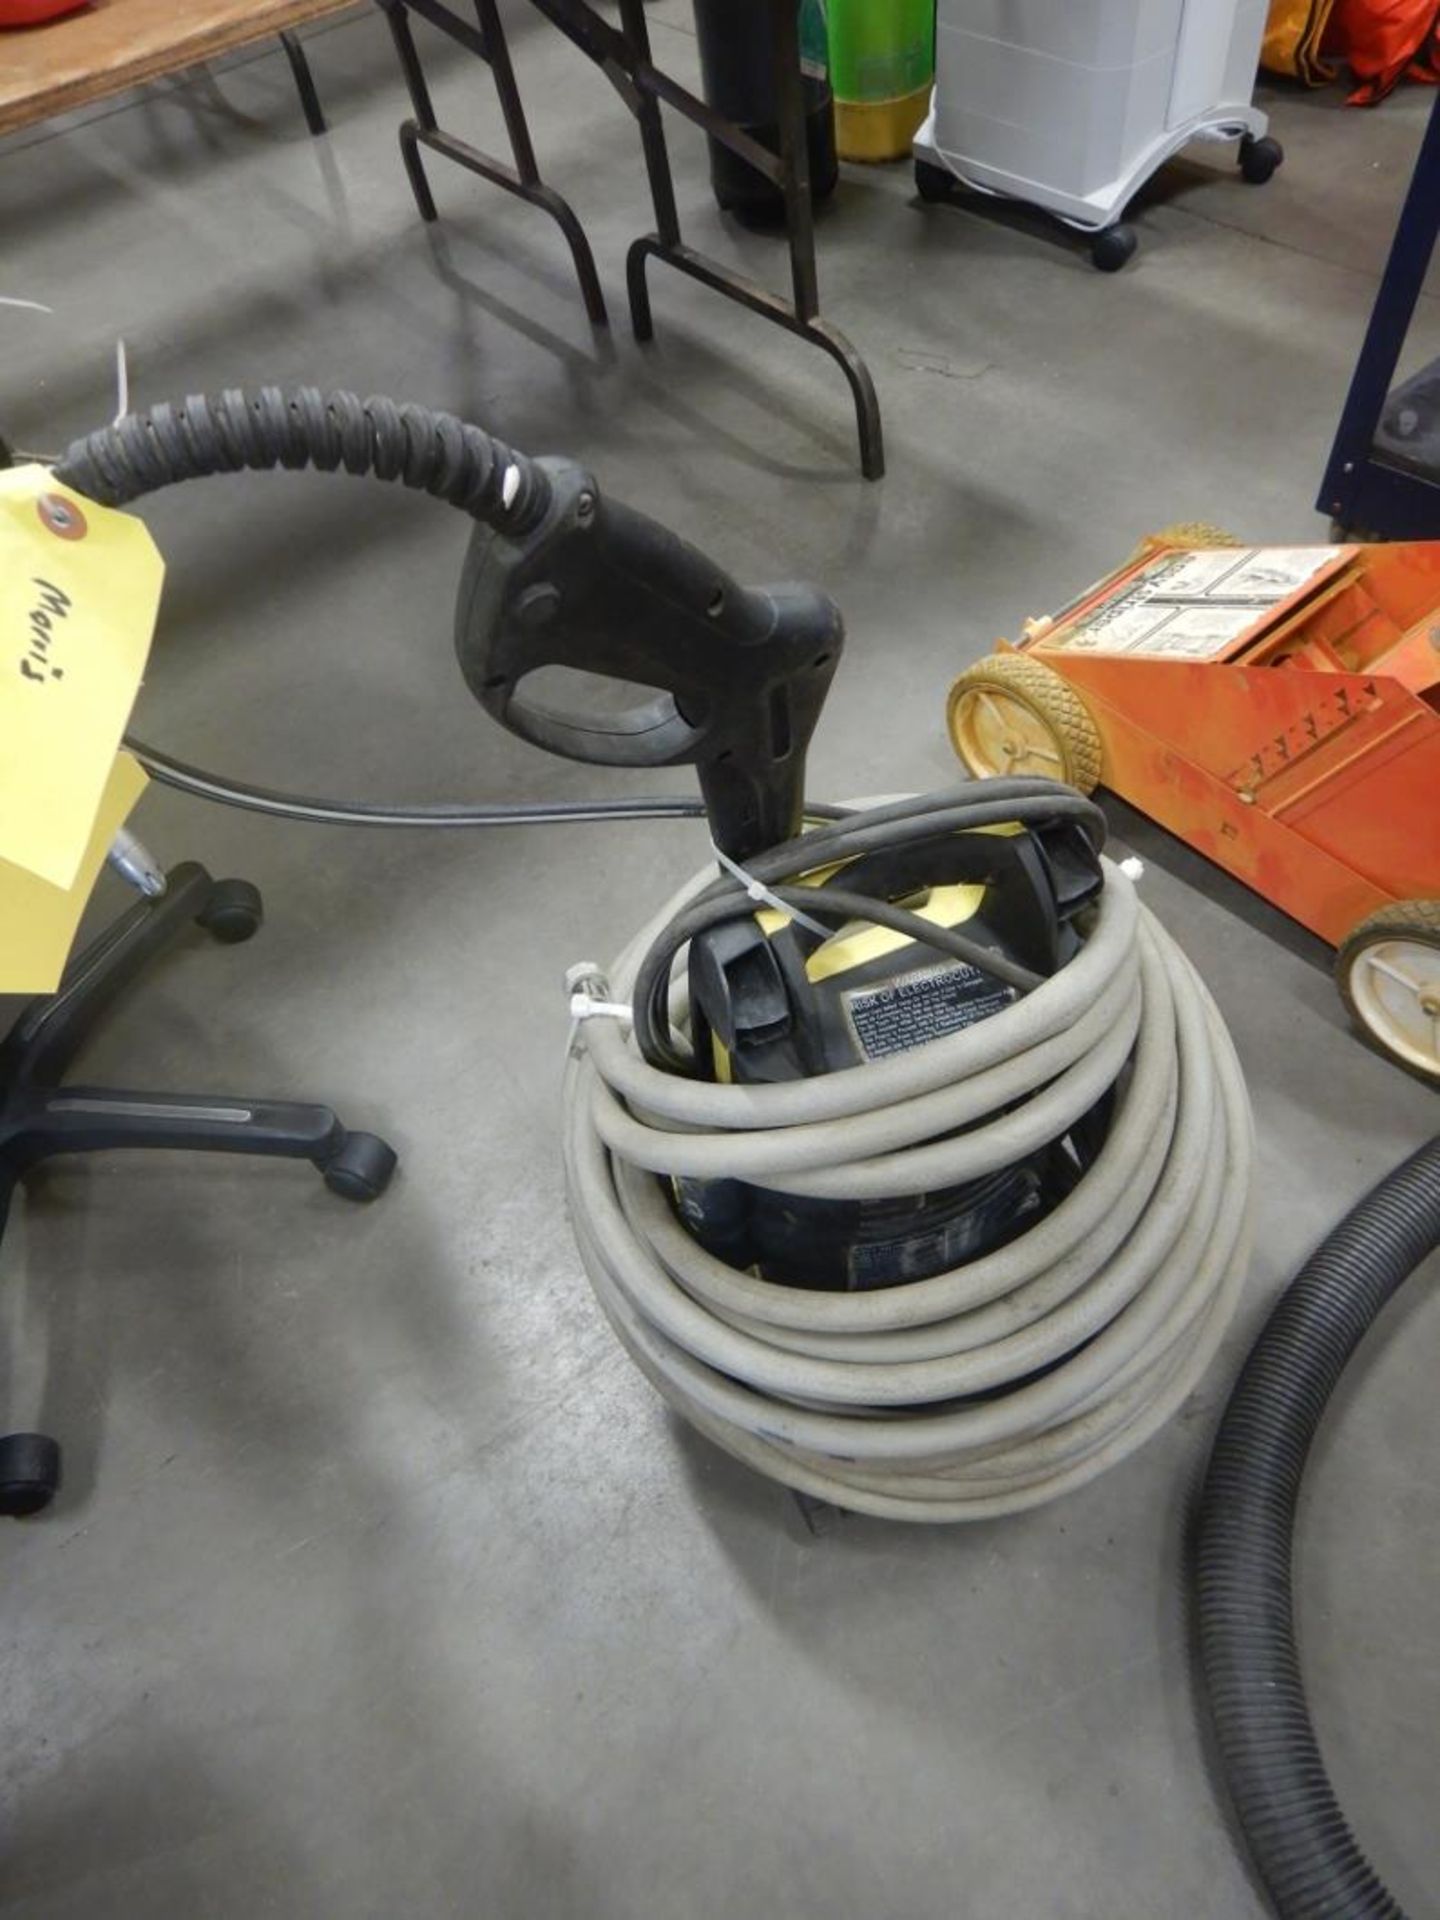 KARCHER ELEC. PRESSURE WASHER W/ WAND AND HOSE - Image 3 of 3